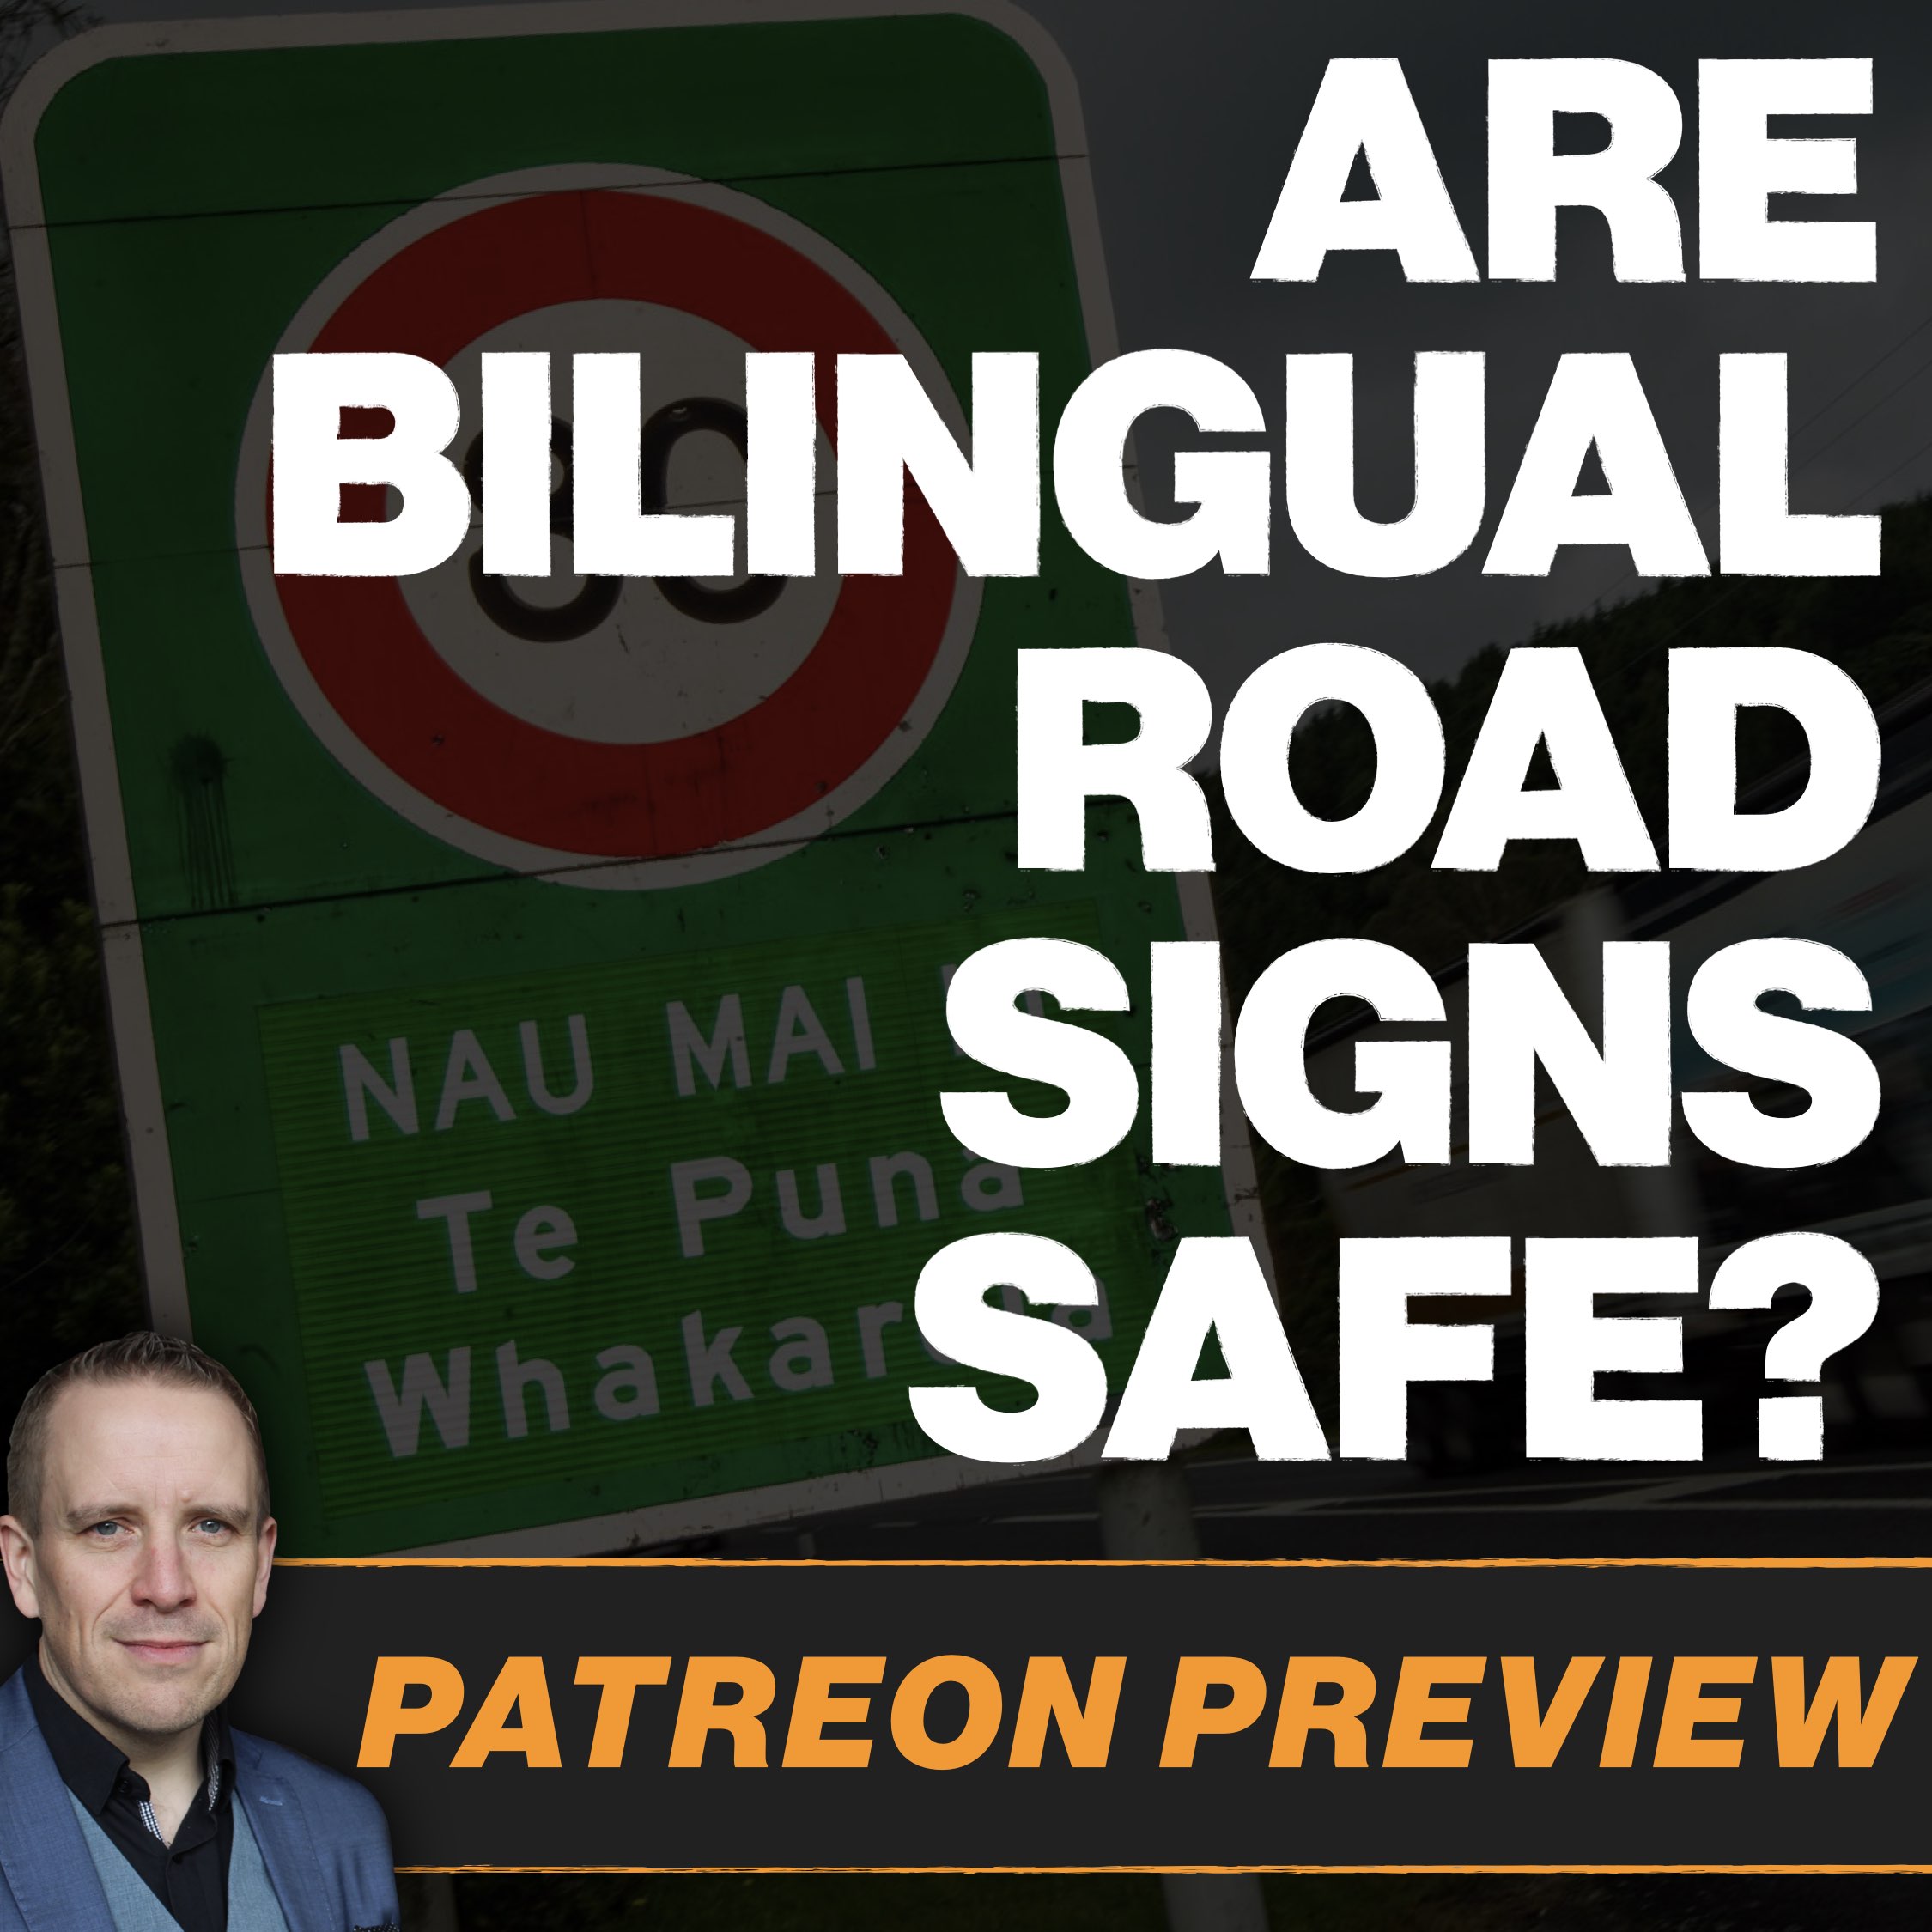 Are Bilingual Road Signs Safe? (Patreon Preview)